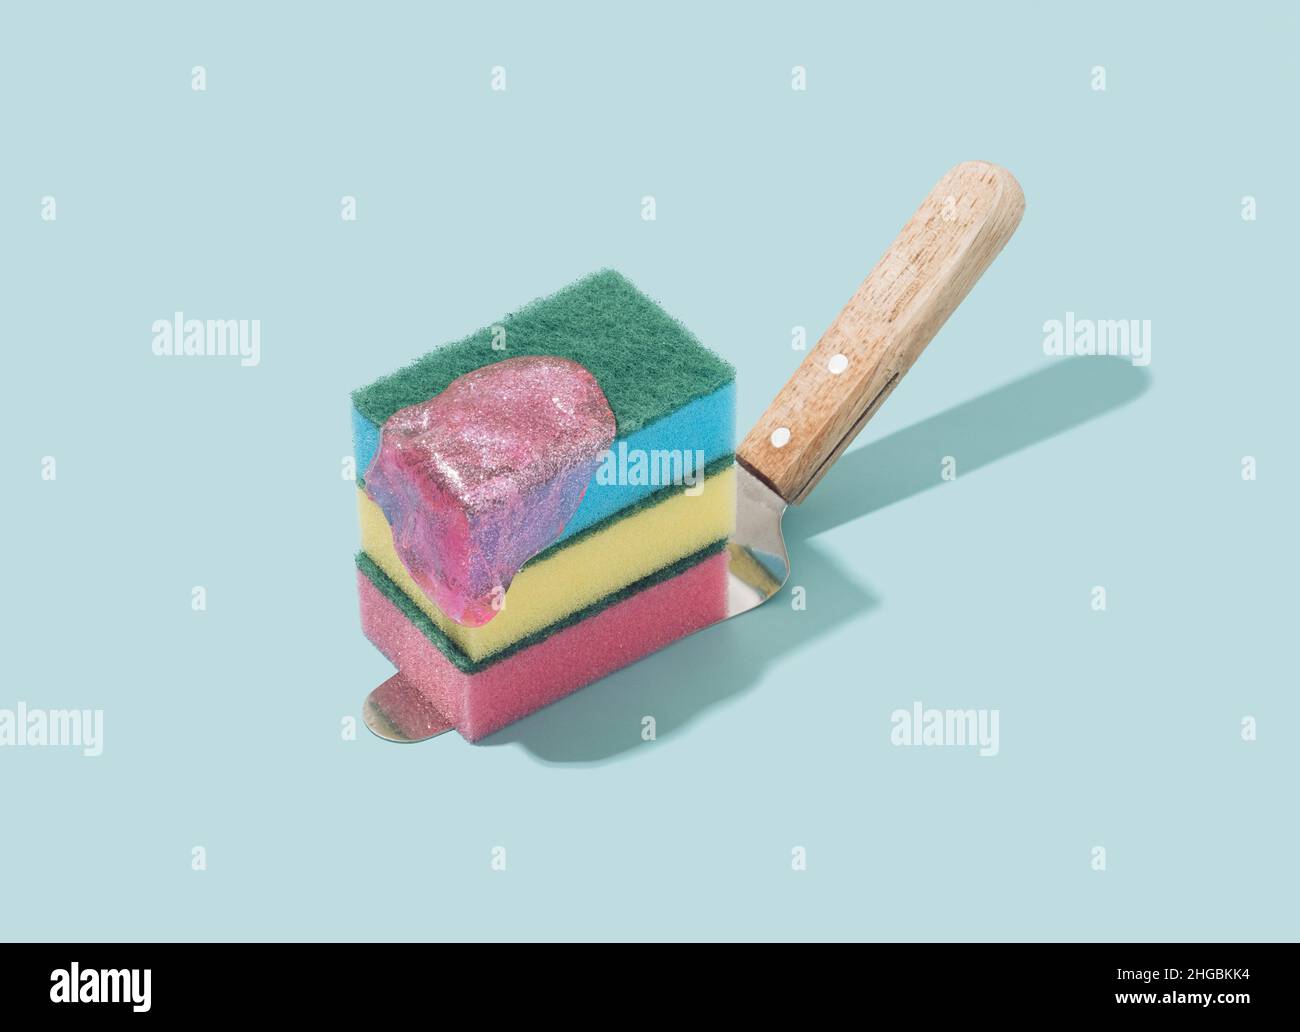 Cake spatula with colorful sponges and pink slime on a pastel blue background. Future past retro concept. Stock Photo